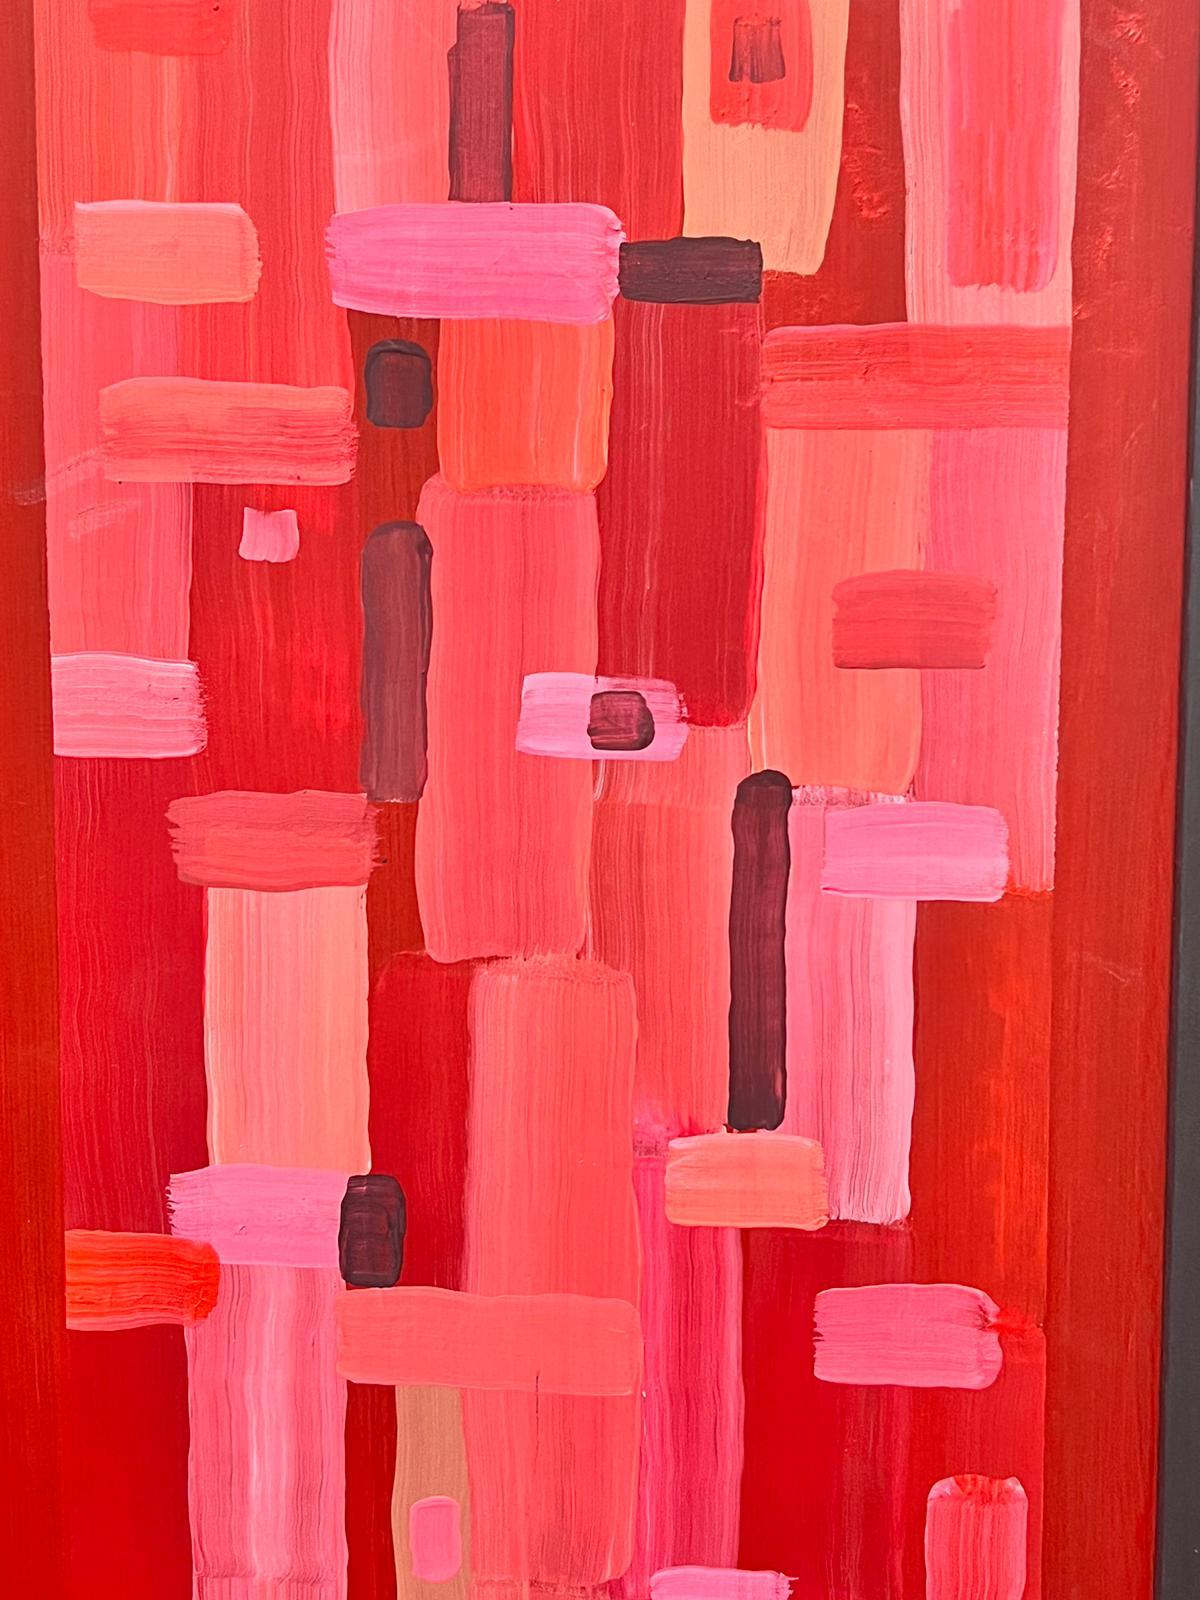 Abstract Geometric Cubist British Painting Abstract Shapes Pinks Reds For Sale 1